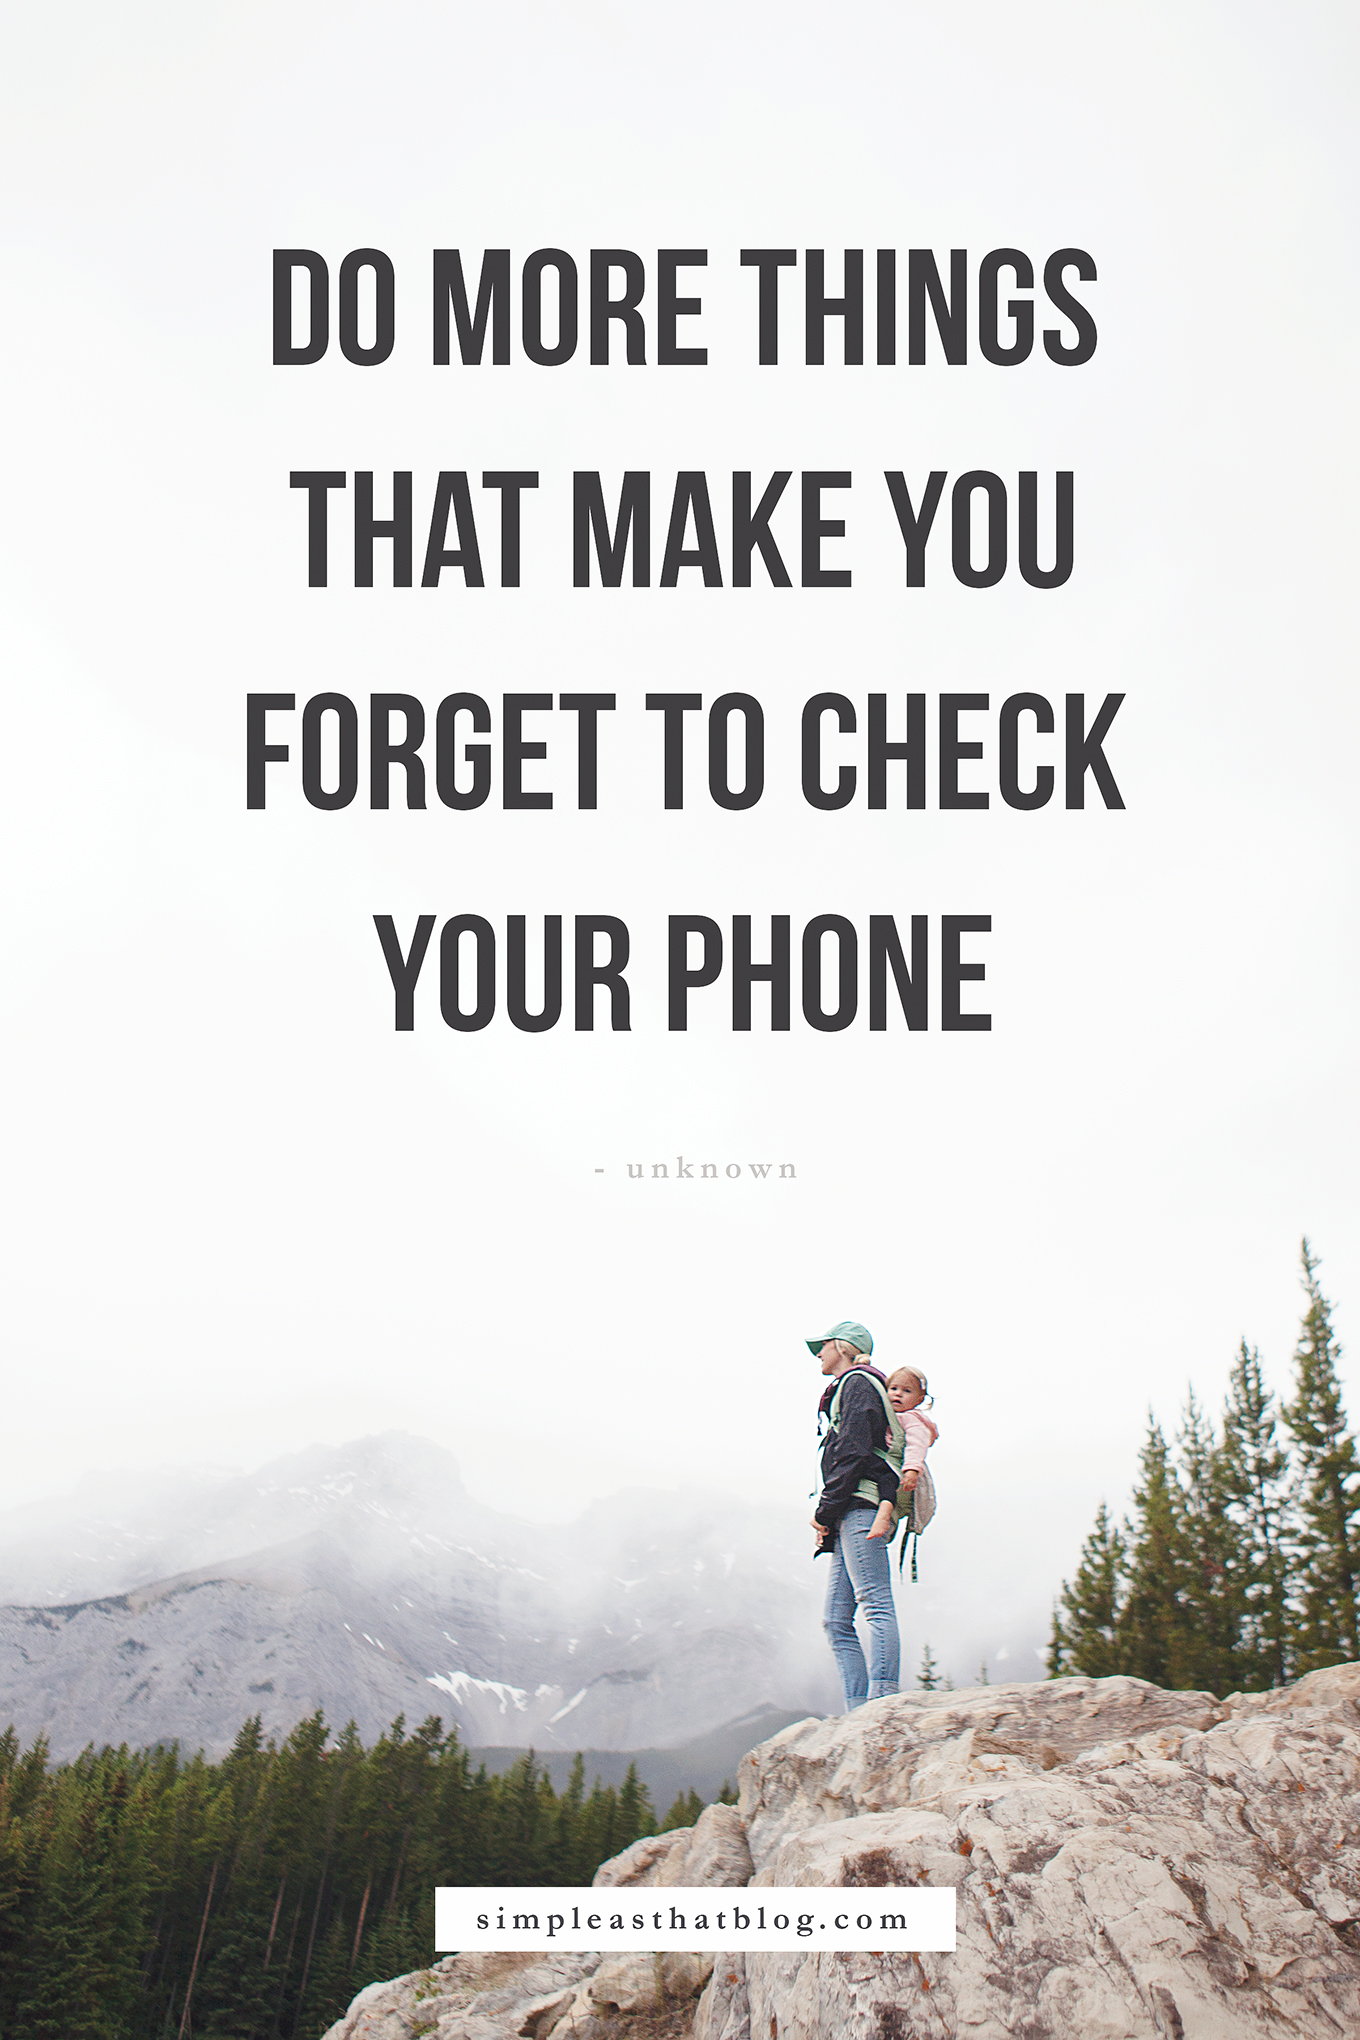 When we really think about it, we all know that we'd rather connect with the people around us than the screen in our back pocket... But that pull is real! Read here for 5 strong reasons to forget your phone more often. 